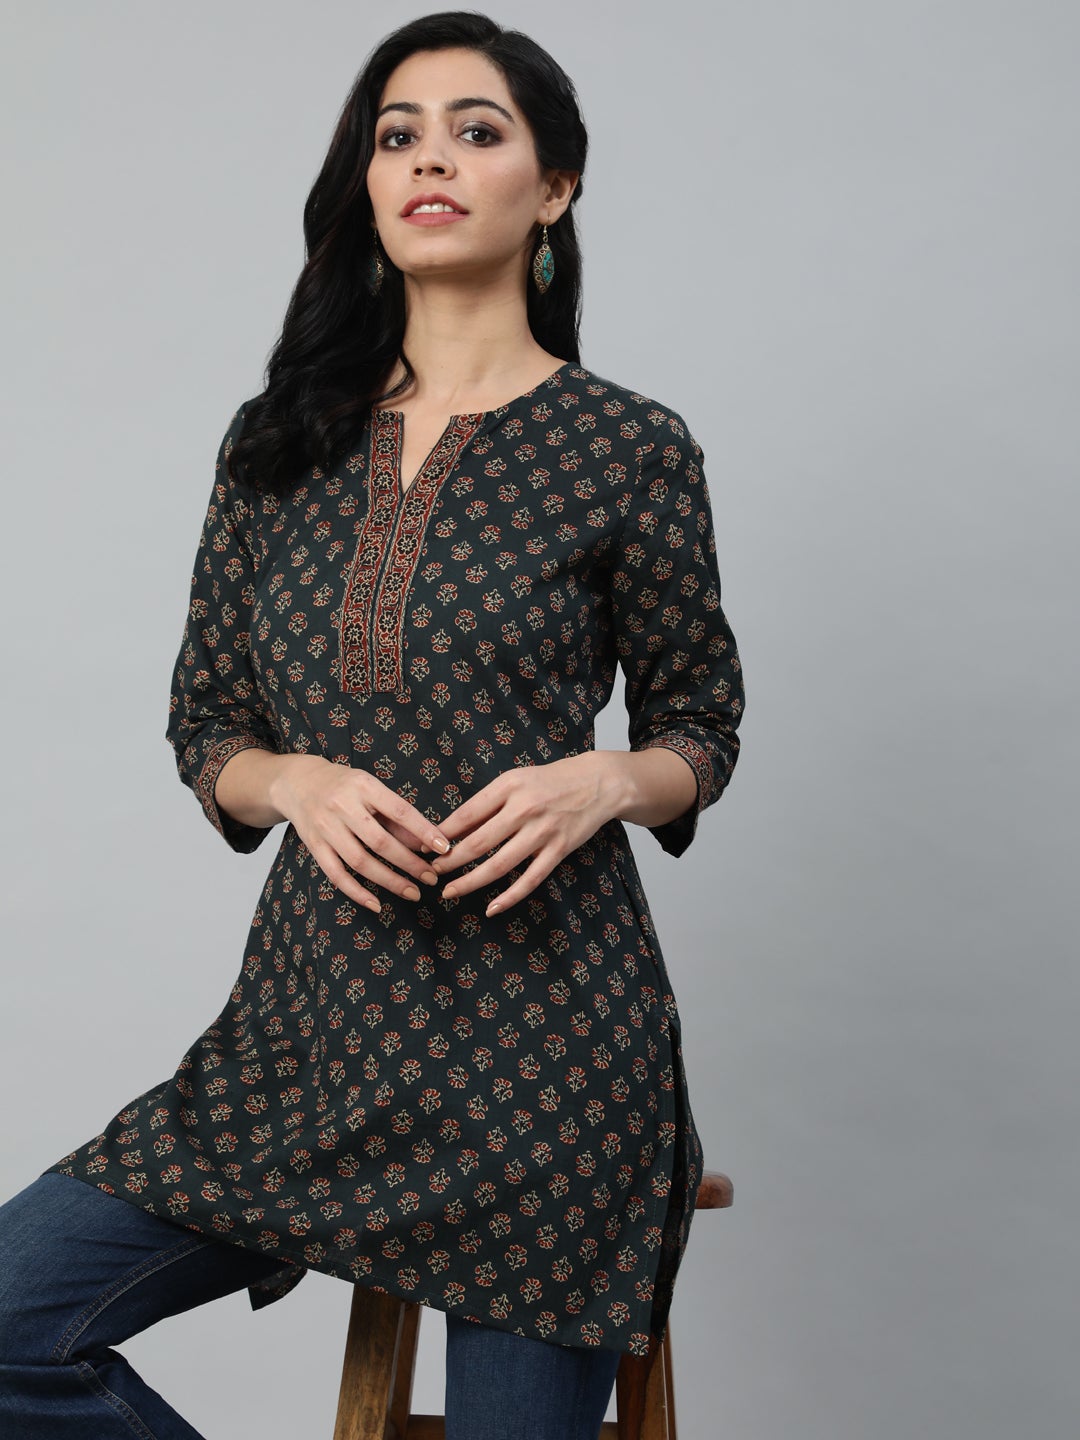 Women's Green Printed Tunic With Three Quarter Sleeves - Nayo Clothing